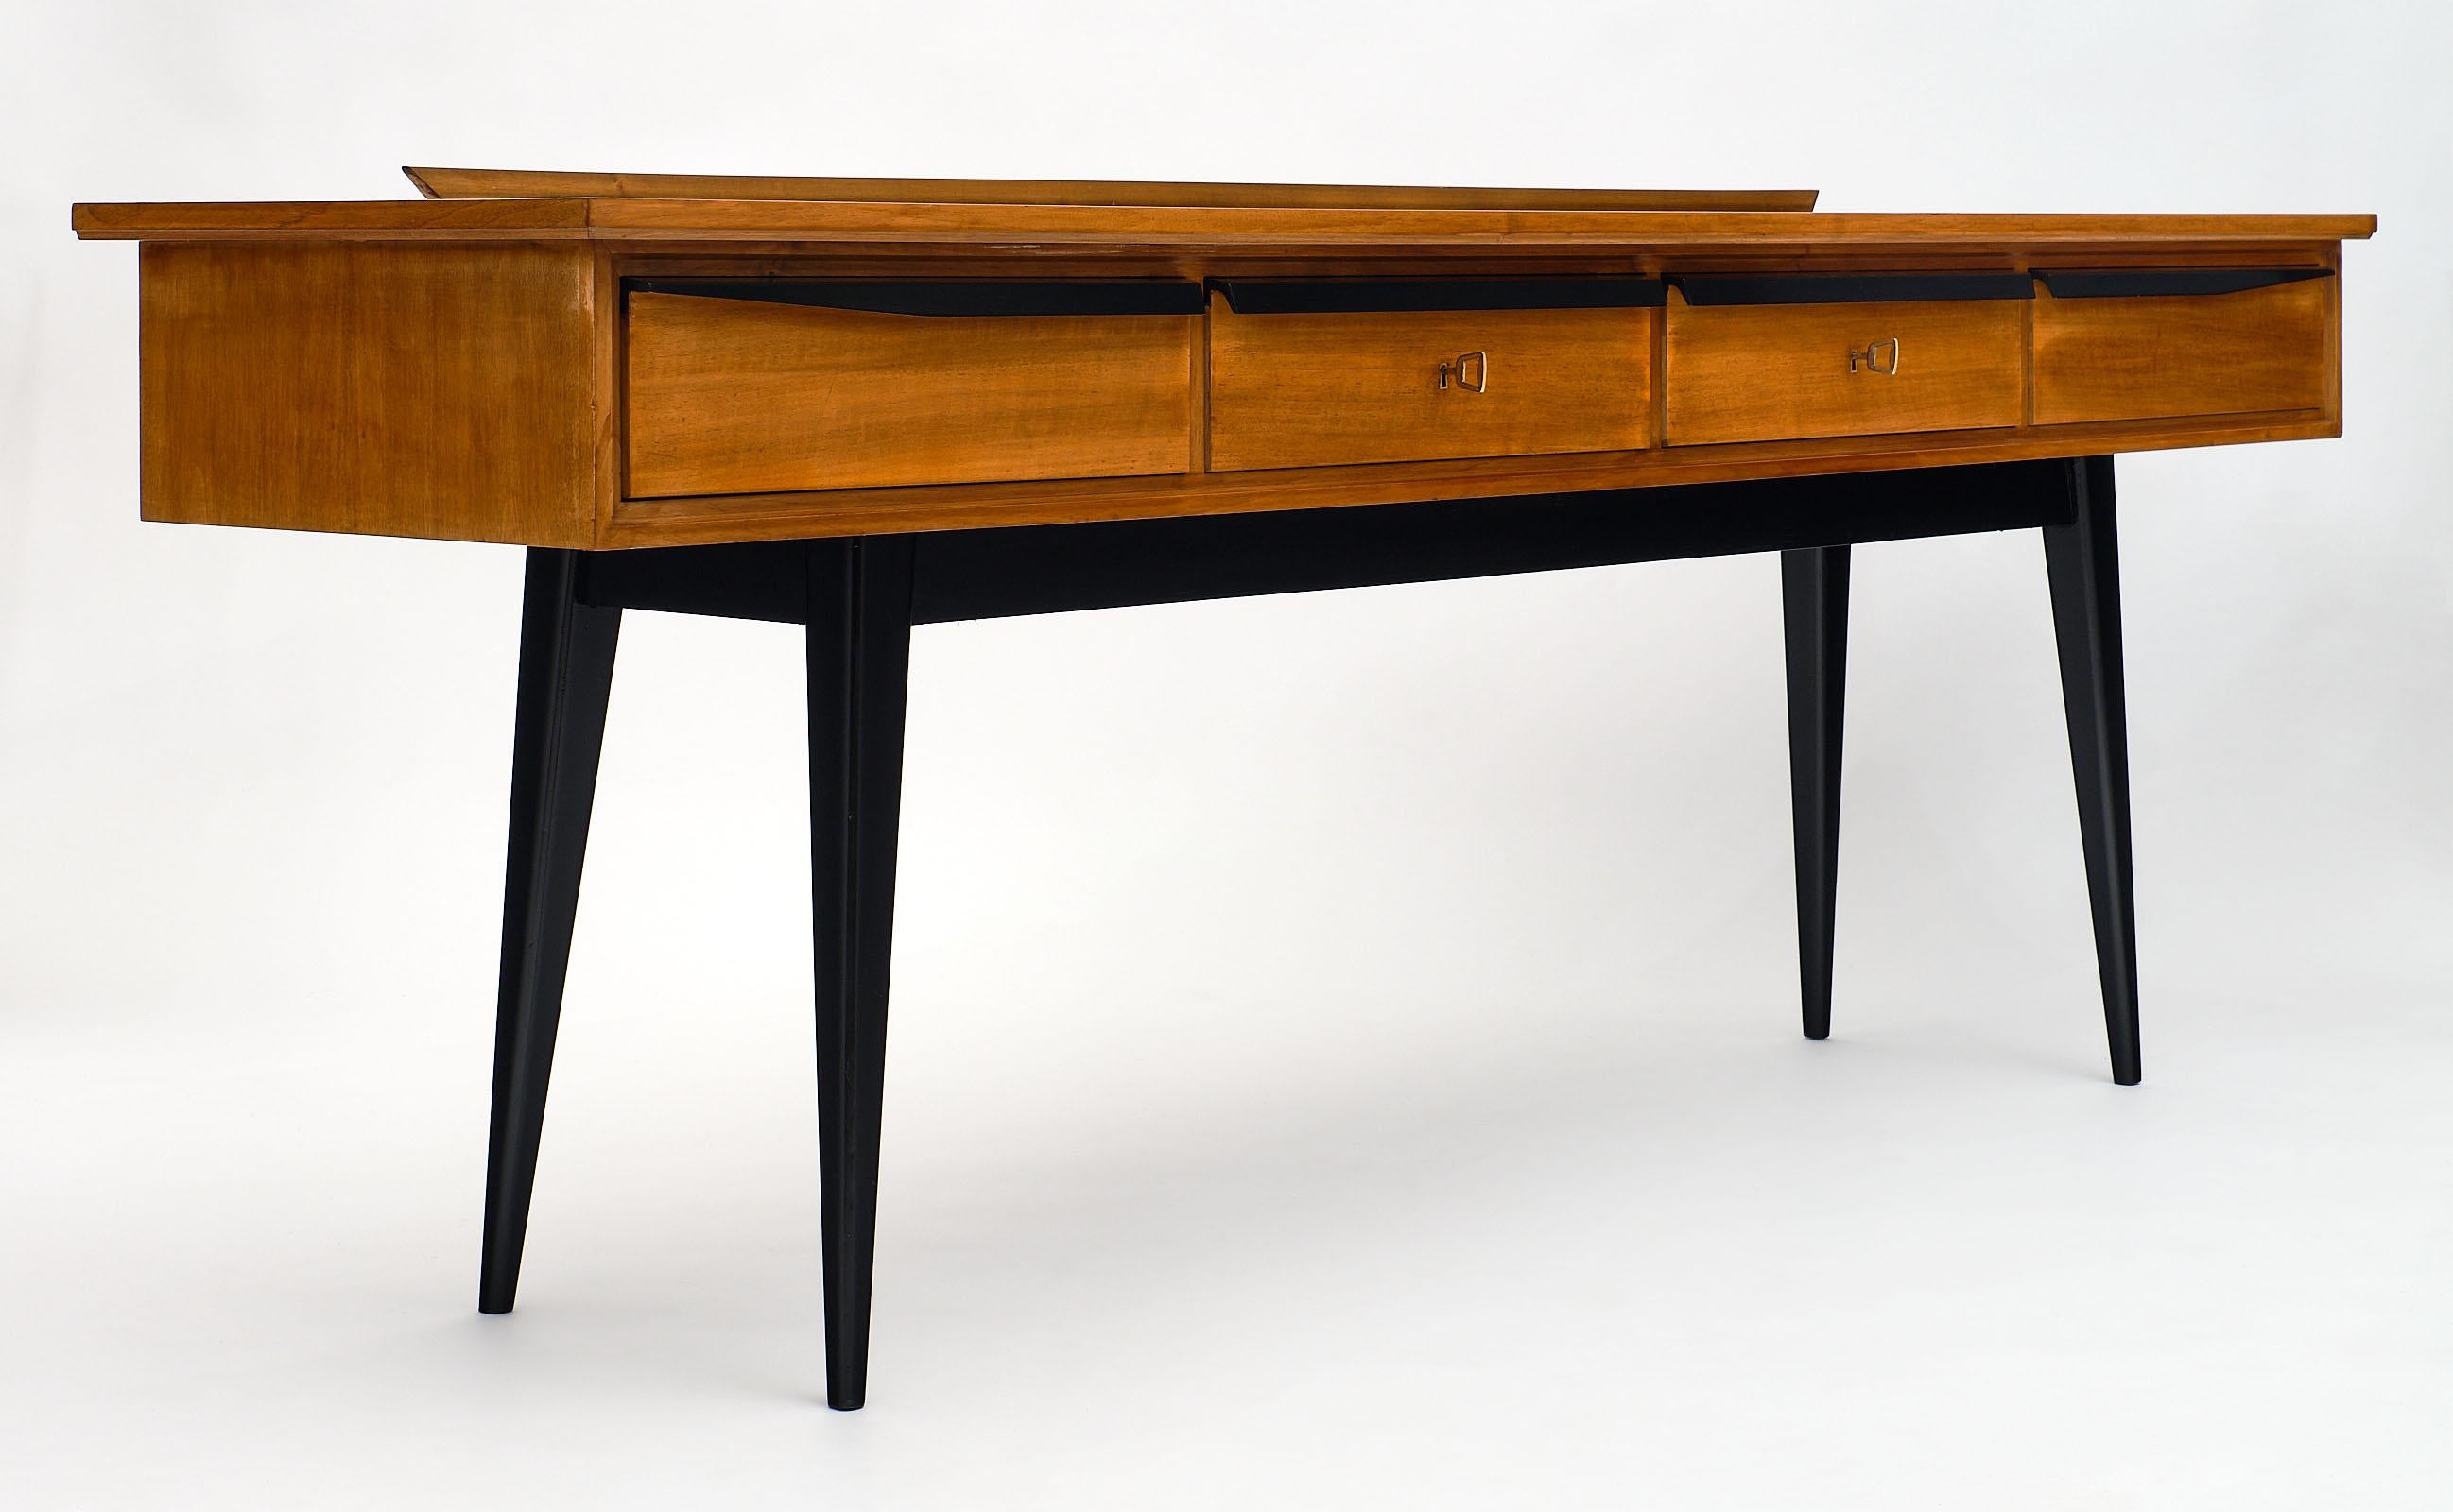 Italian midcentury console table with leather top made of sycamore. We love the tapered, flared legs which have been ebonized. The wooden handles are also ebonized on the four drawers. The center two drawers have original locks and keys in working